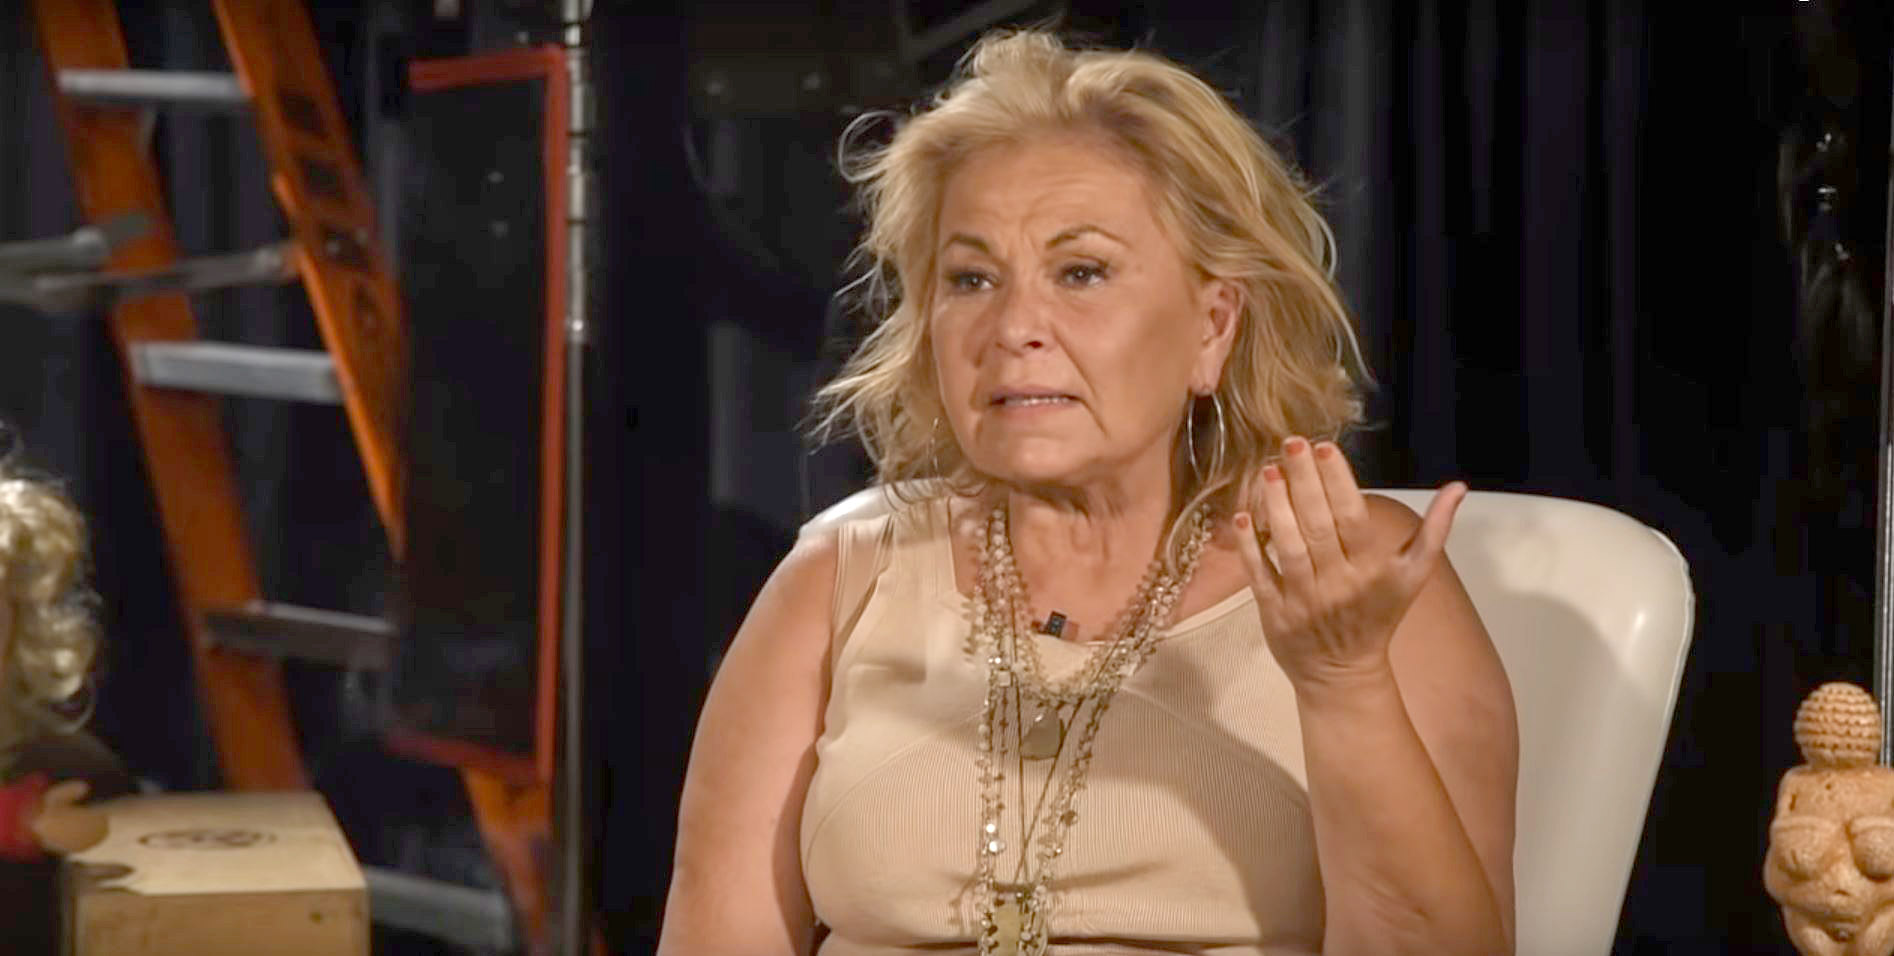 PHOTO: A new video shows Roseanne Barr discussing the racist tweet she posted about a former Obama administration official that prompted the cancellation of her eponymous sitcom. 